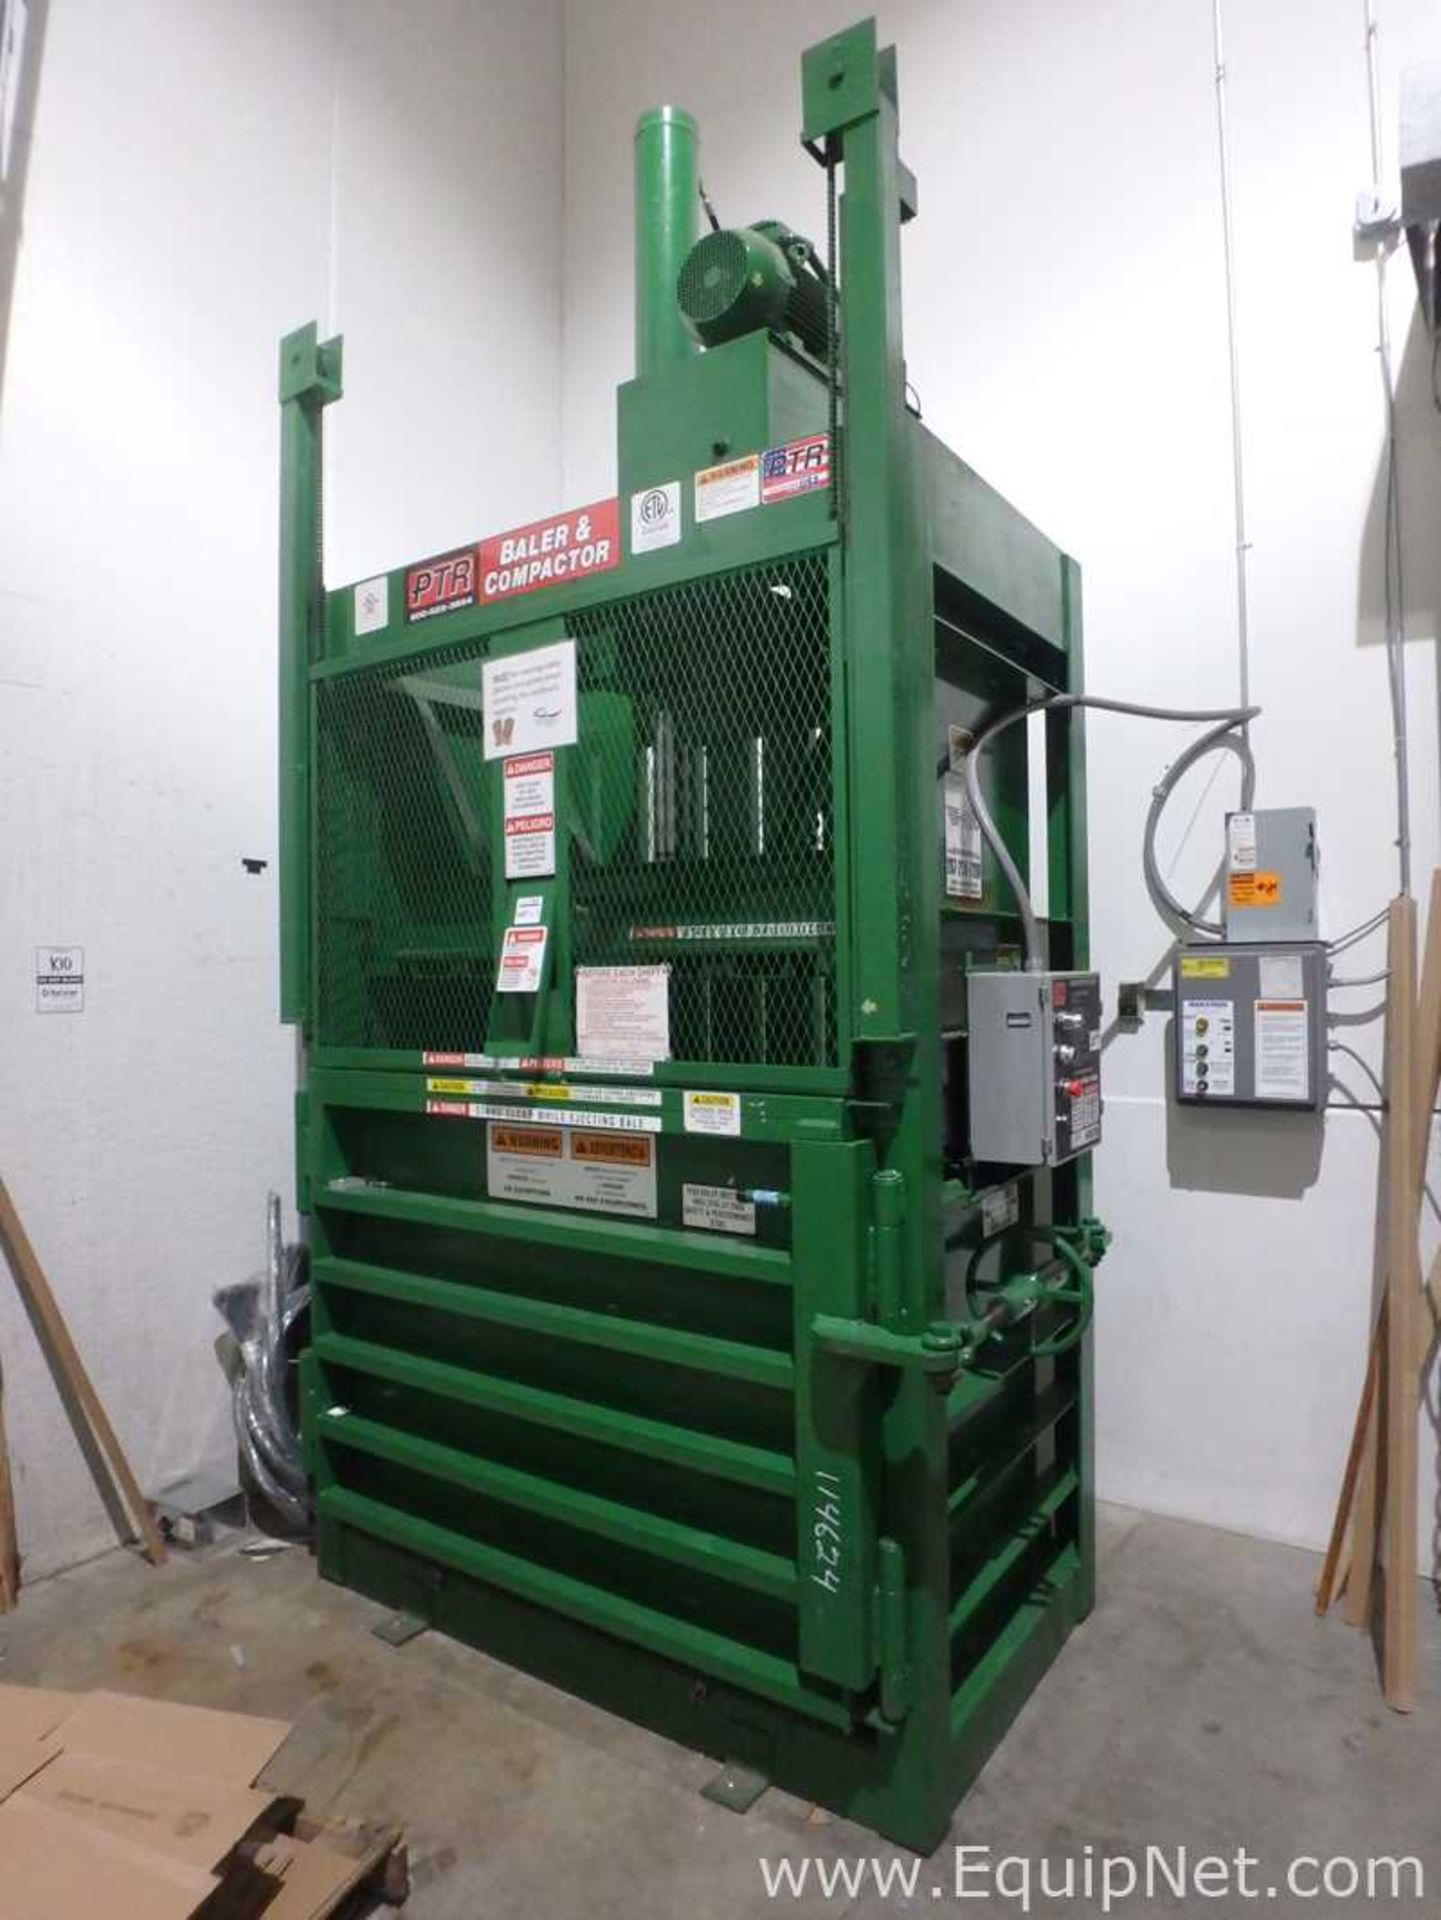 PTR Baler and Compactor